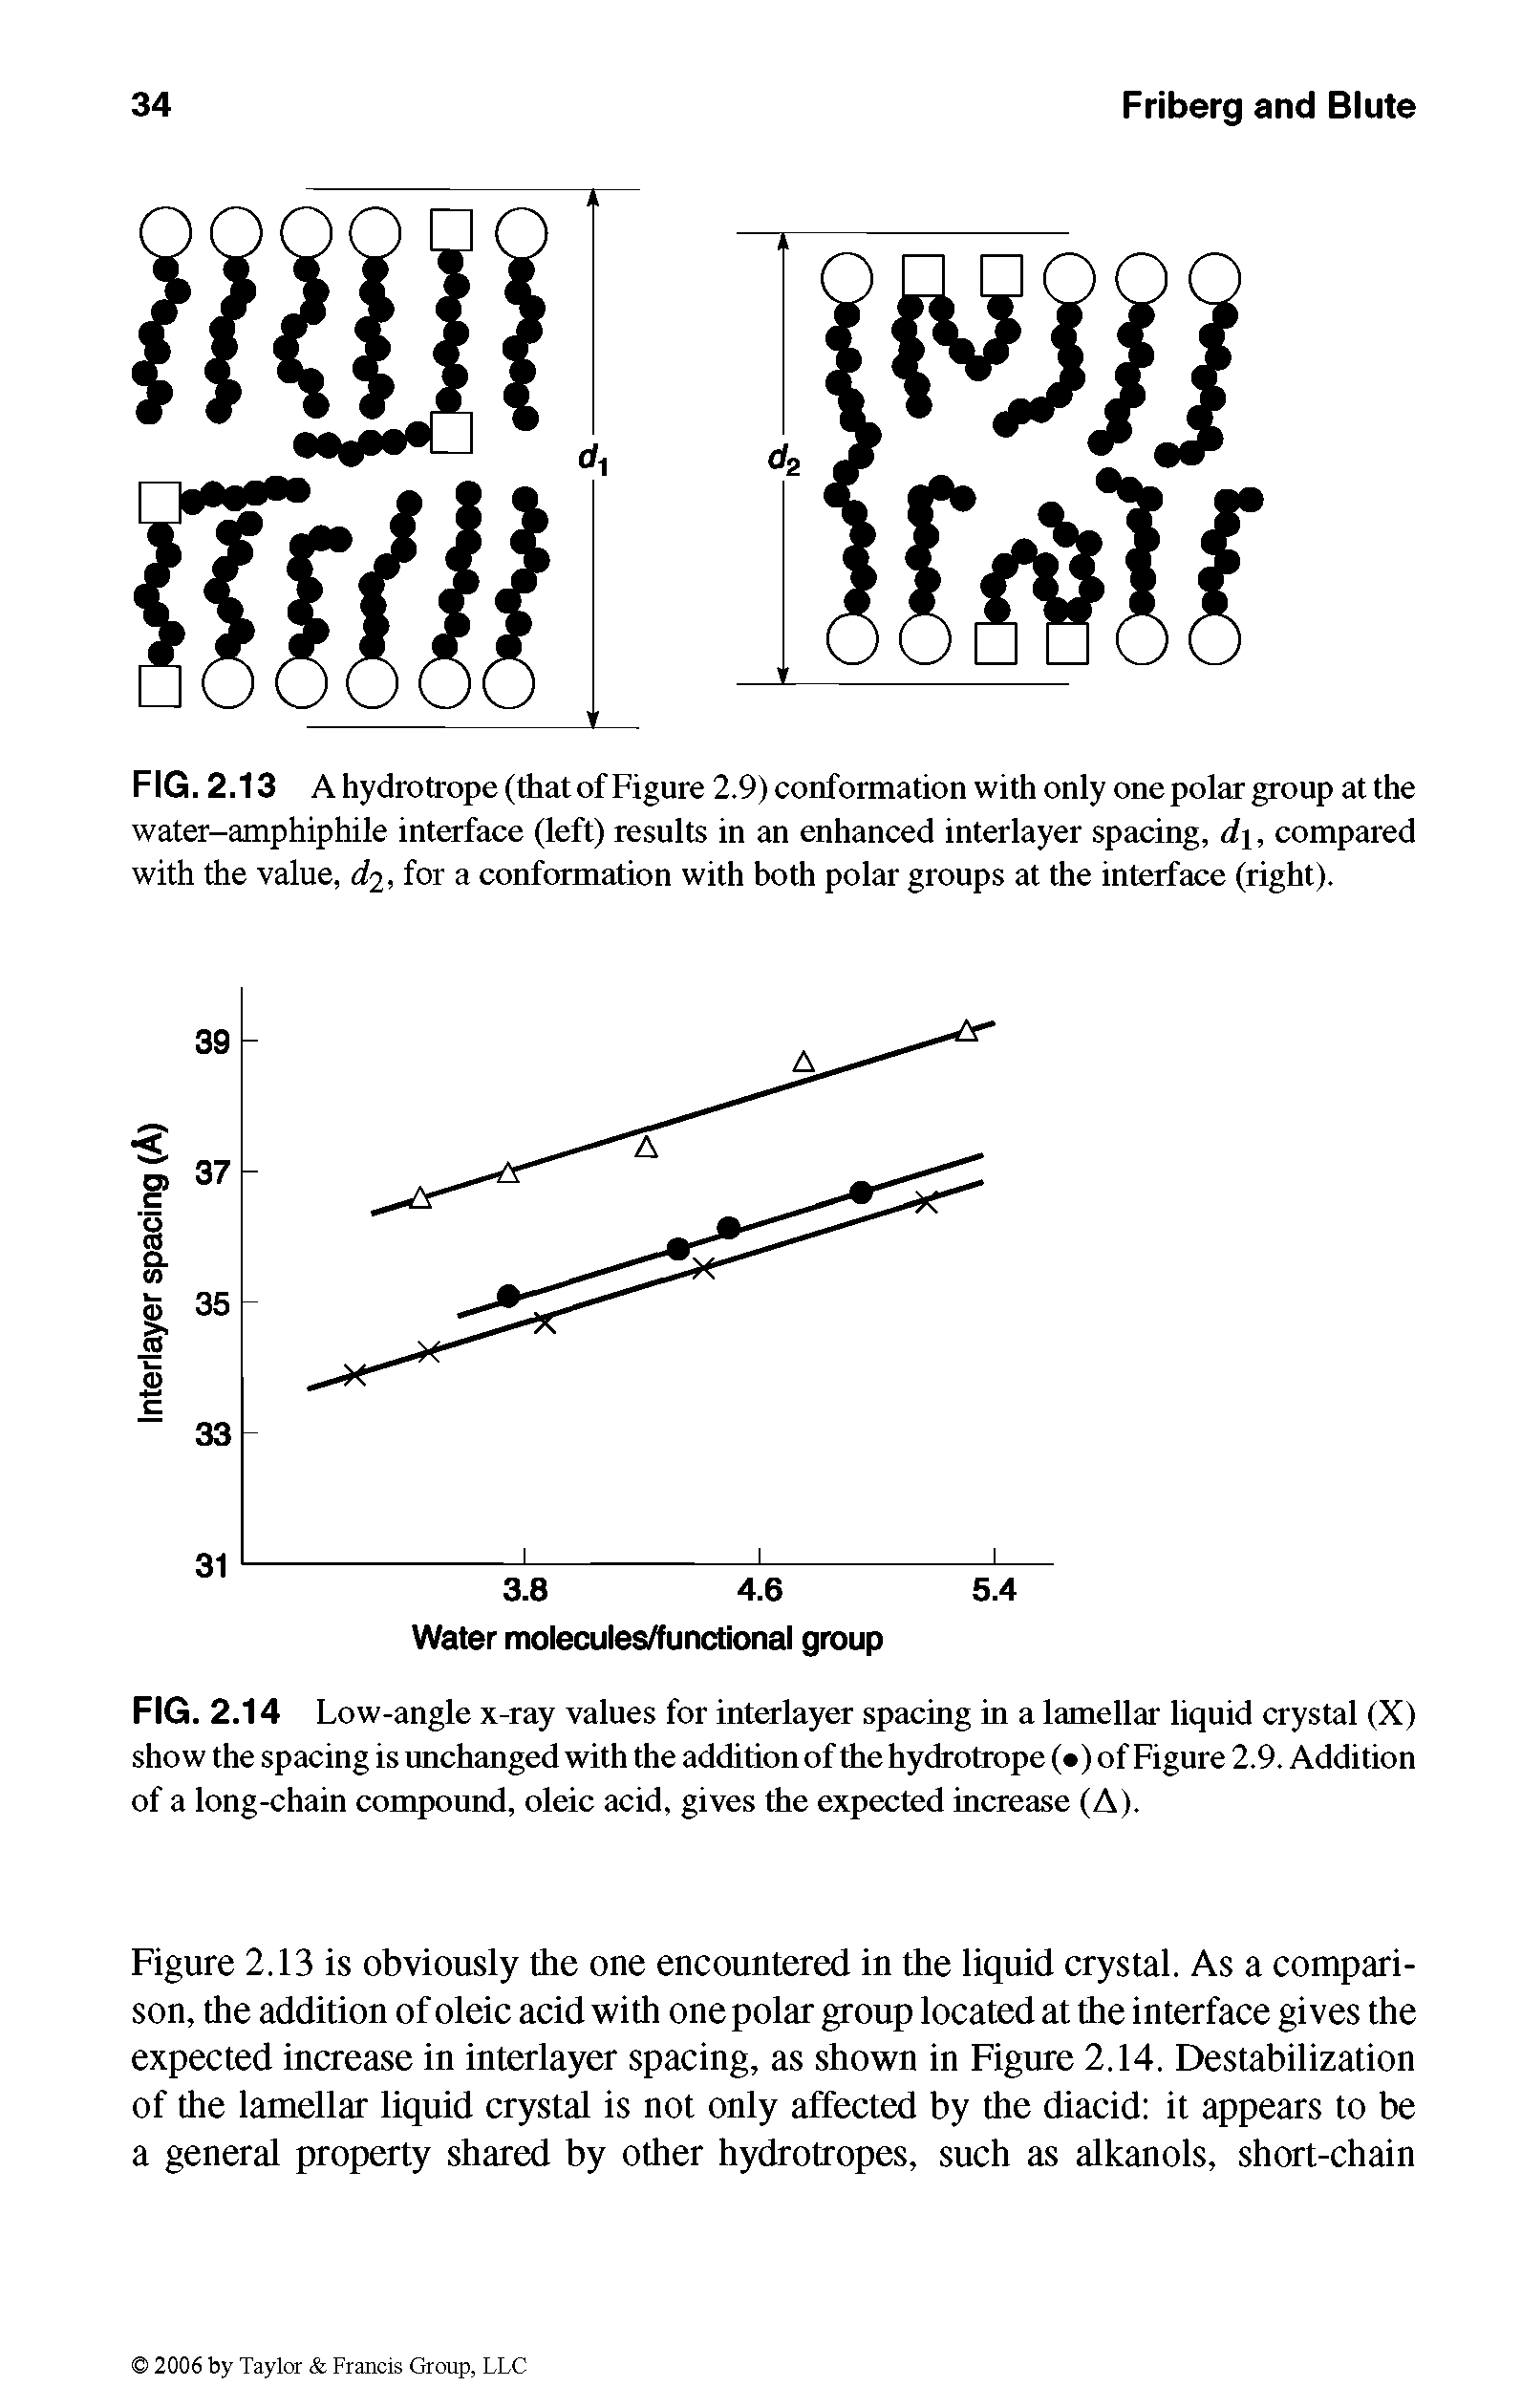 Figure 2.13 is obviously the one encountered in the liquid crystal. As a comparison, the addition of oleic acid with one polar group located at the interface gives the expected increase in interlayer spacing, as shown in Figure 2.14. Destabilization of the lamellar liquid crystal is not only affected by the diacid it appears to be a general property shared by other hydrotropes, such as alkanols, short-chain...